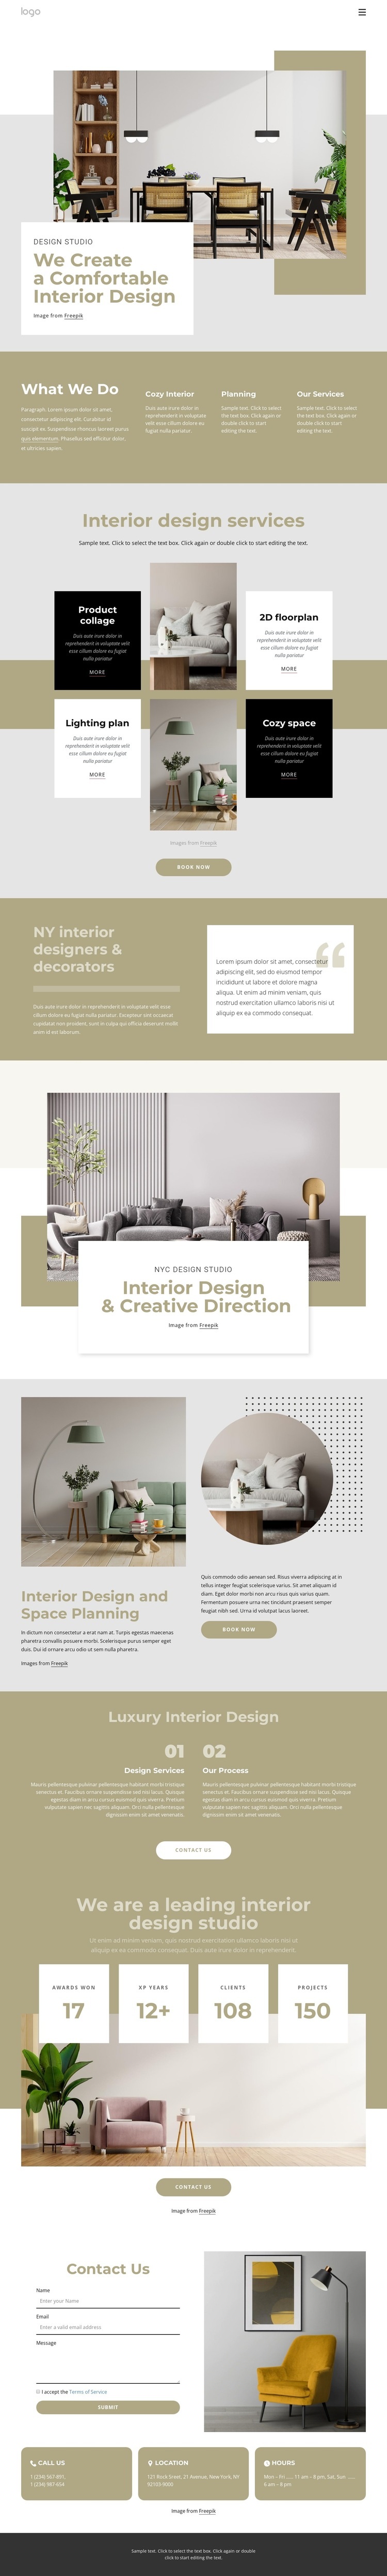 We create a comfortable interiors Html Code Example